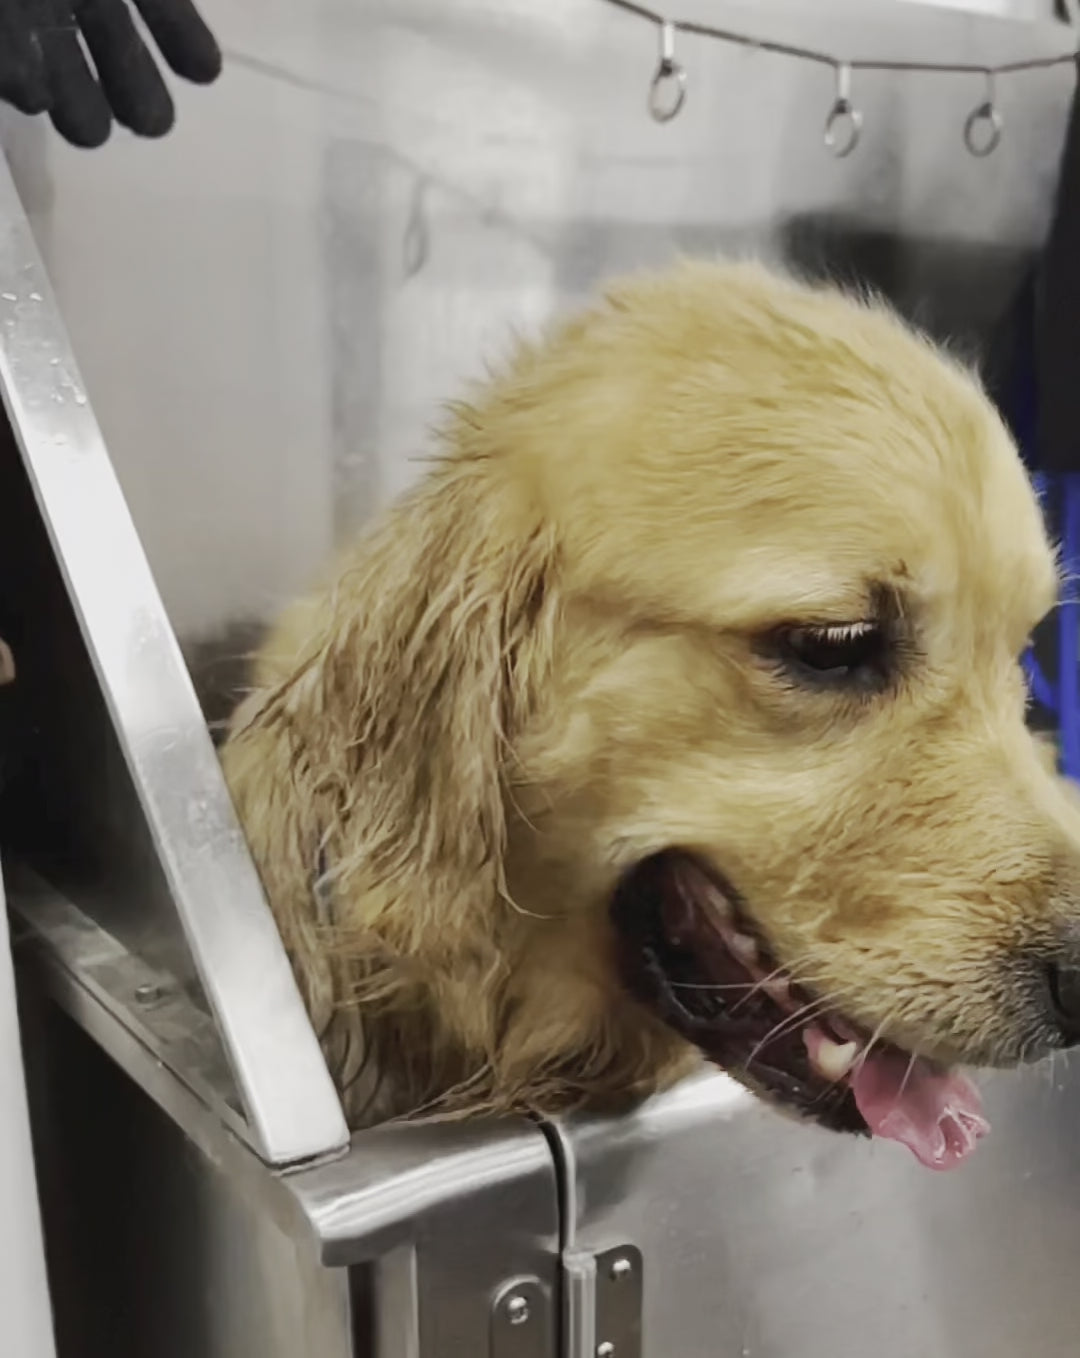 Load video: Daily Routine Pet Grooming Salon